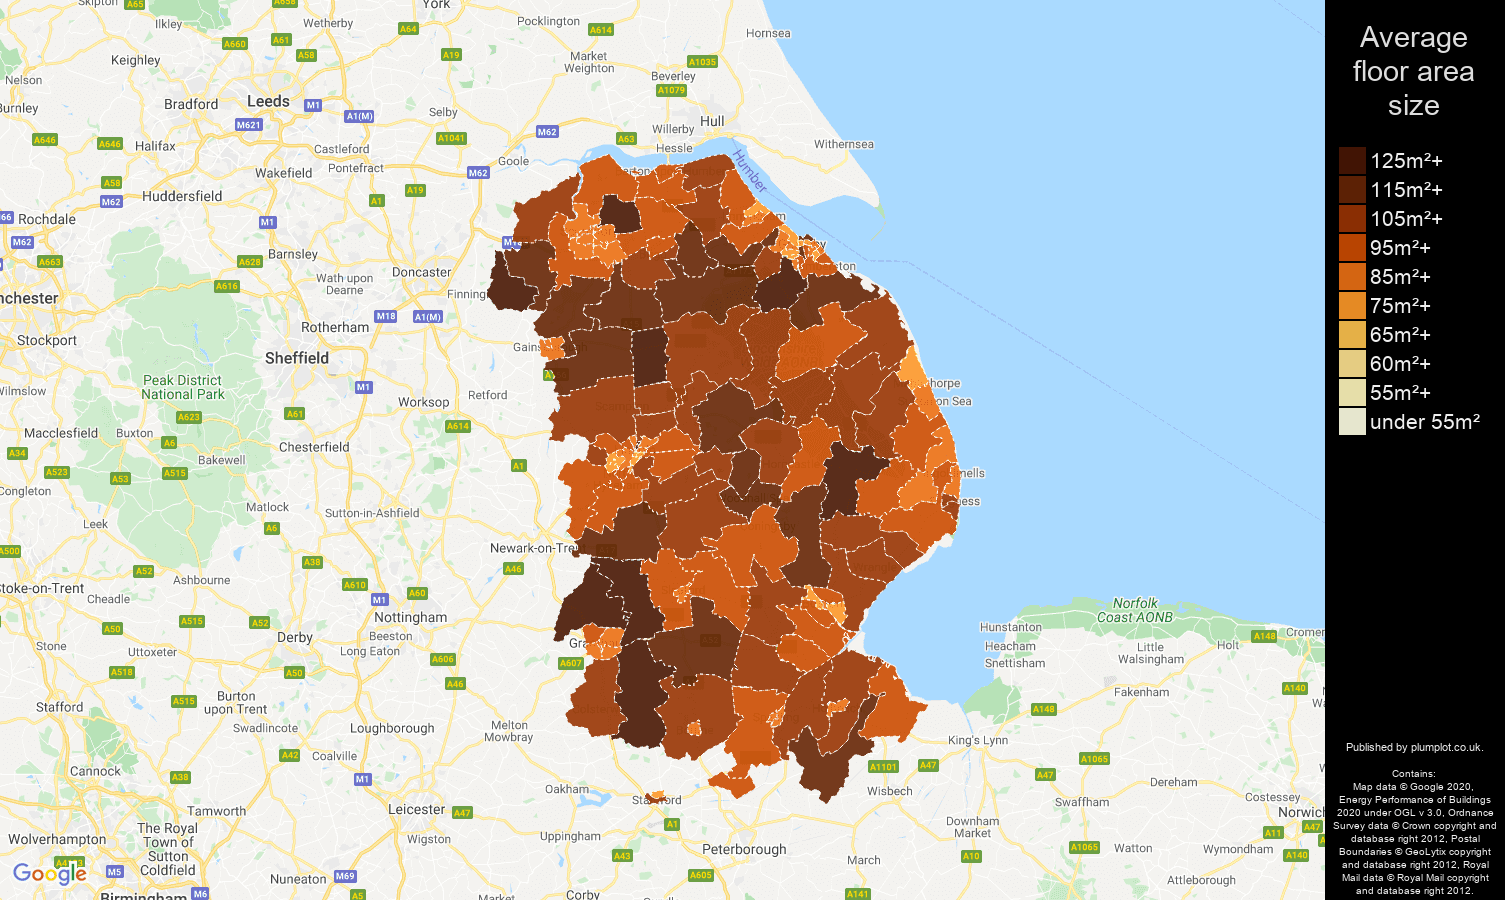 Lincolnshire map of average floor area size of houses